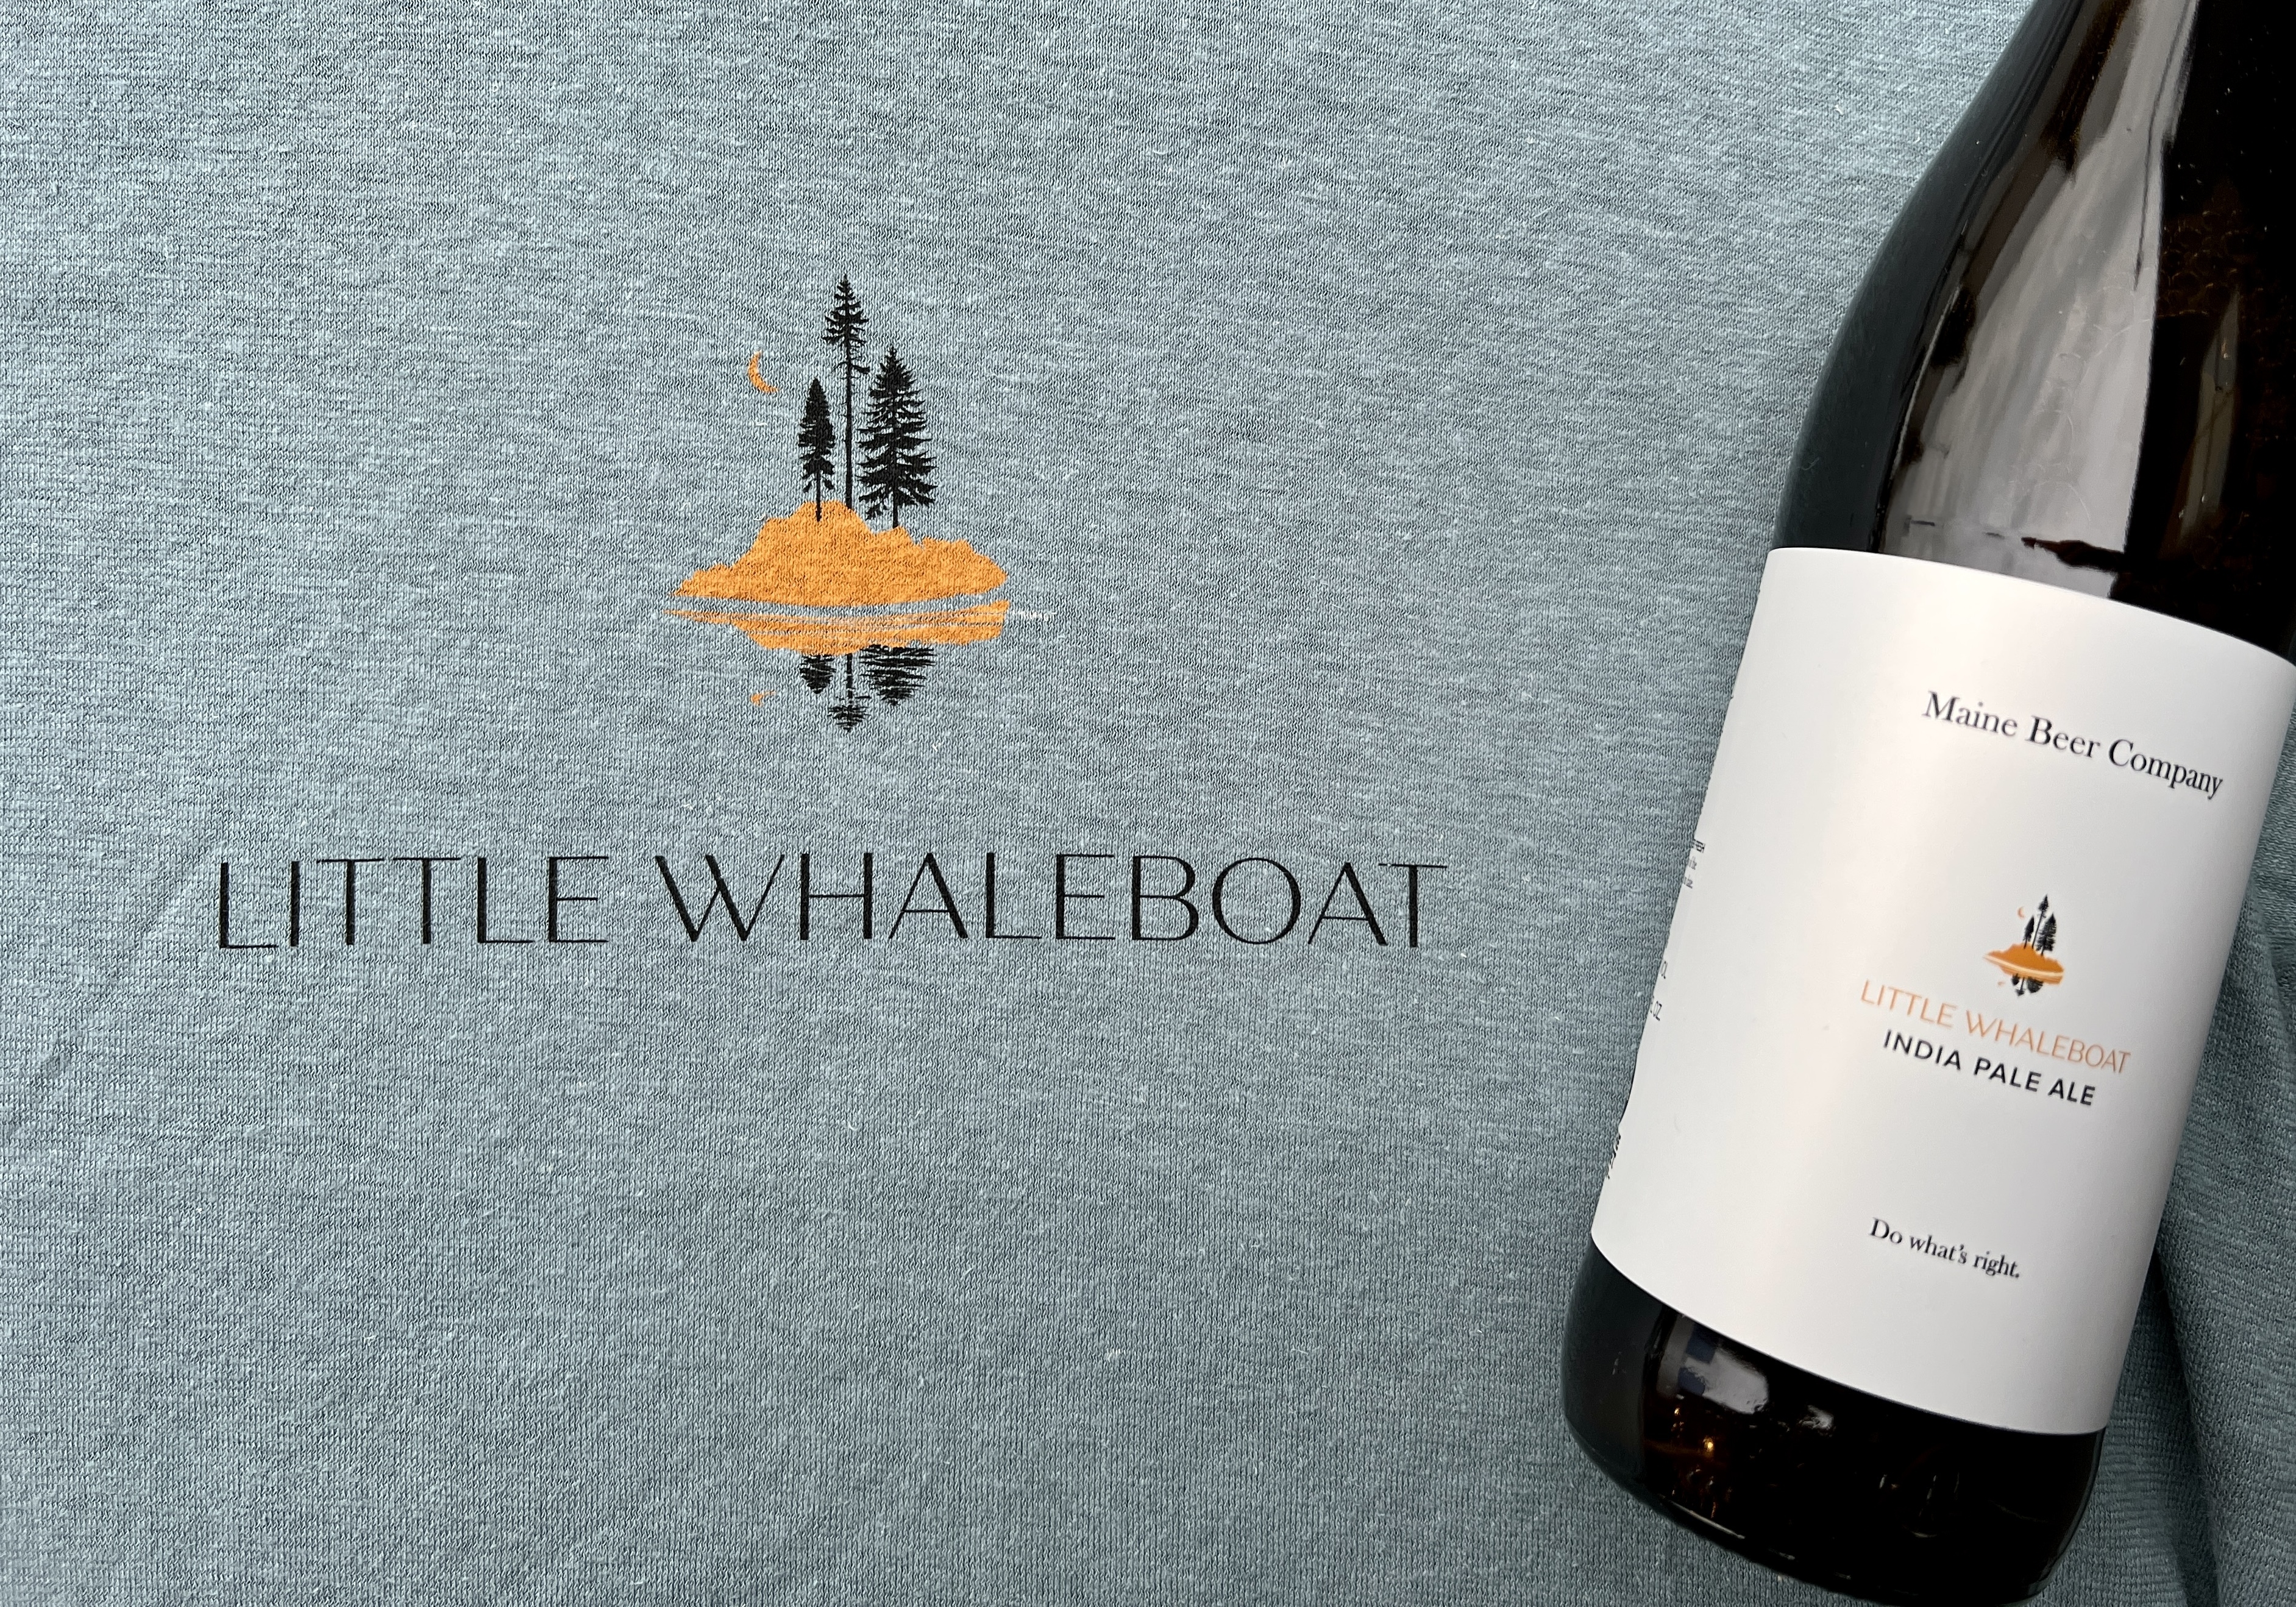 Little Whaleboat